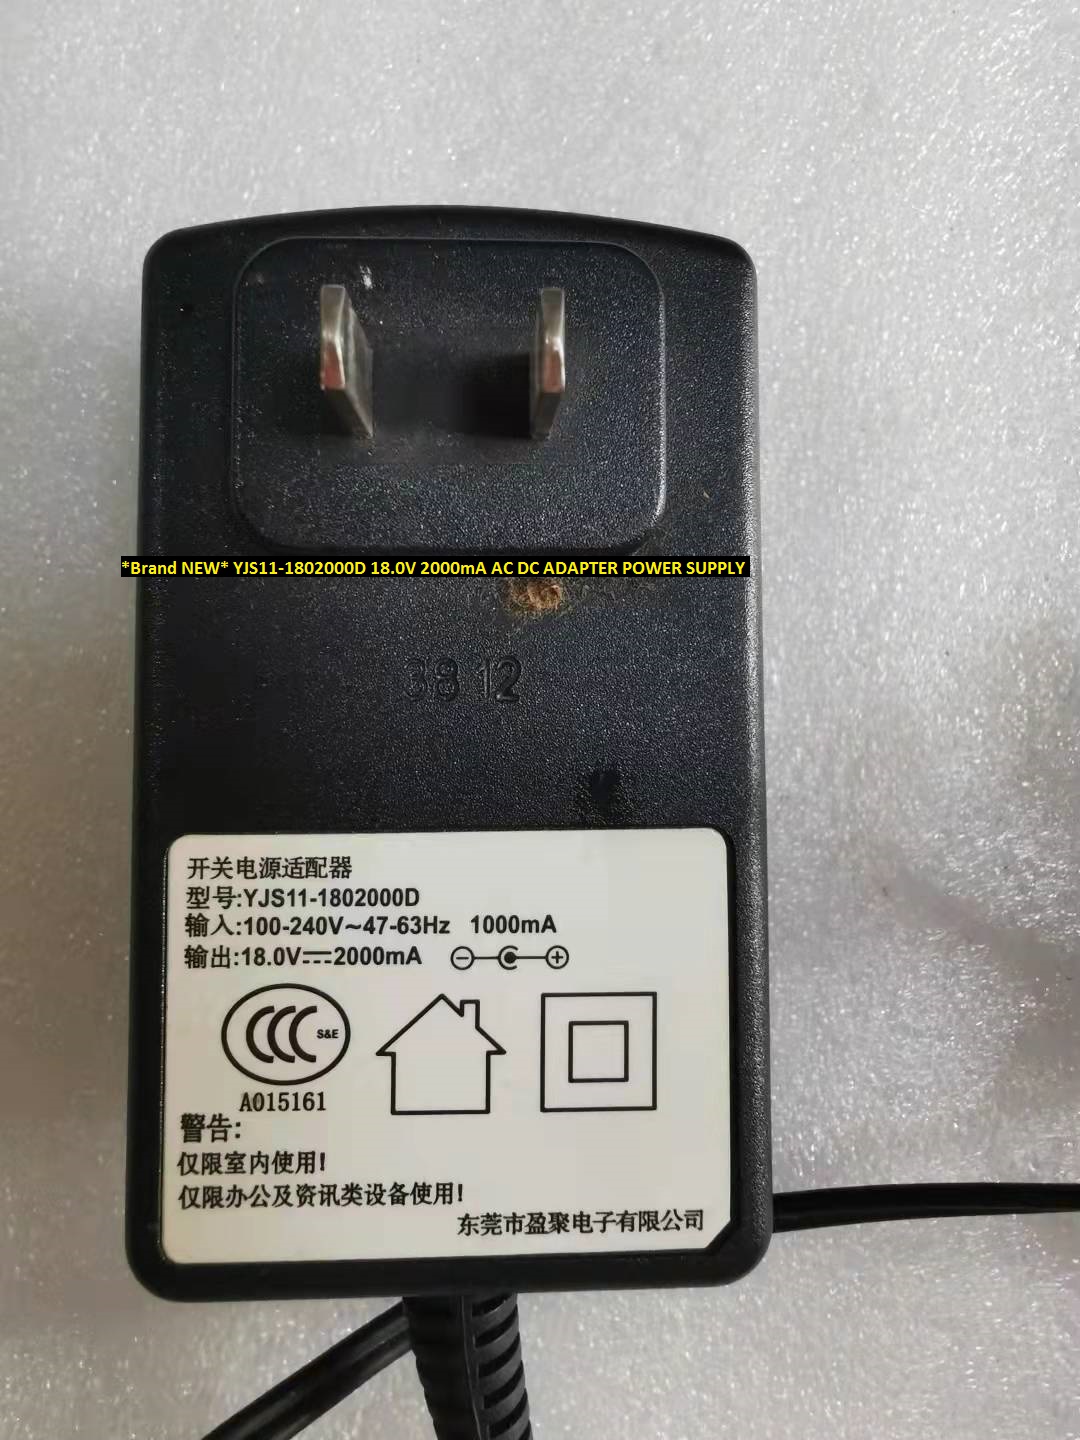 *Brand NEW* 18.0V 2000mA YJS11-1802000D AC DC ADAPTER POWER SUPPLY